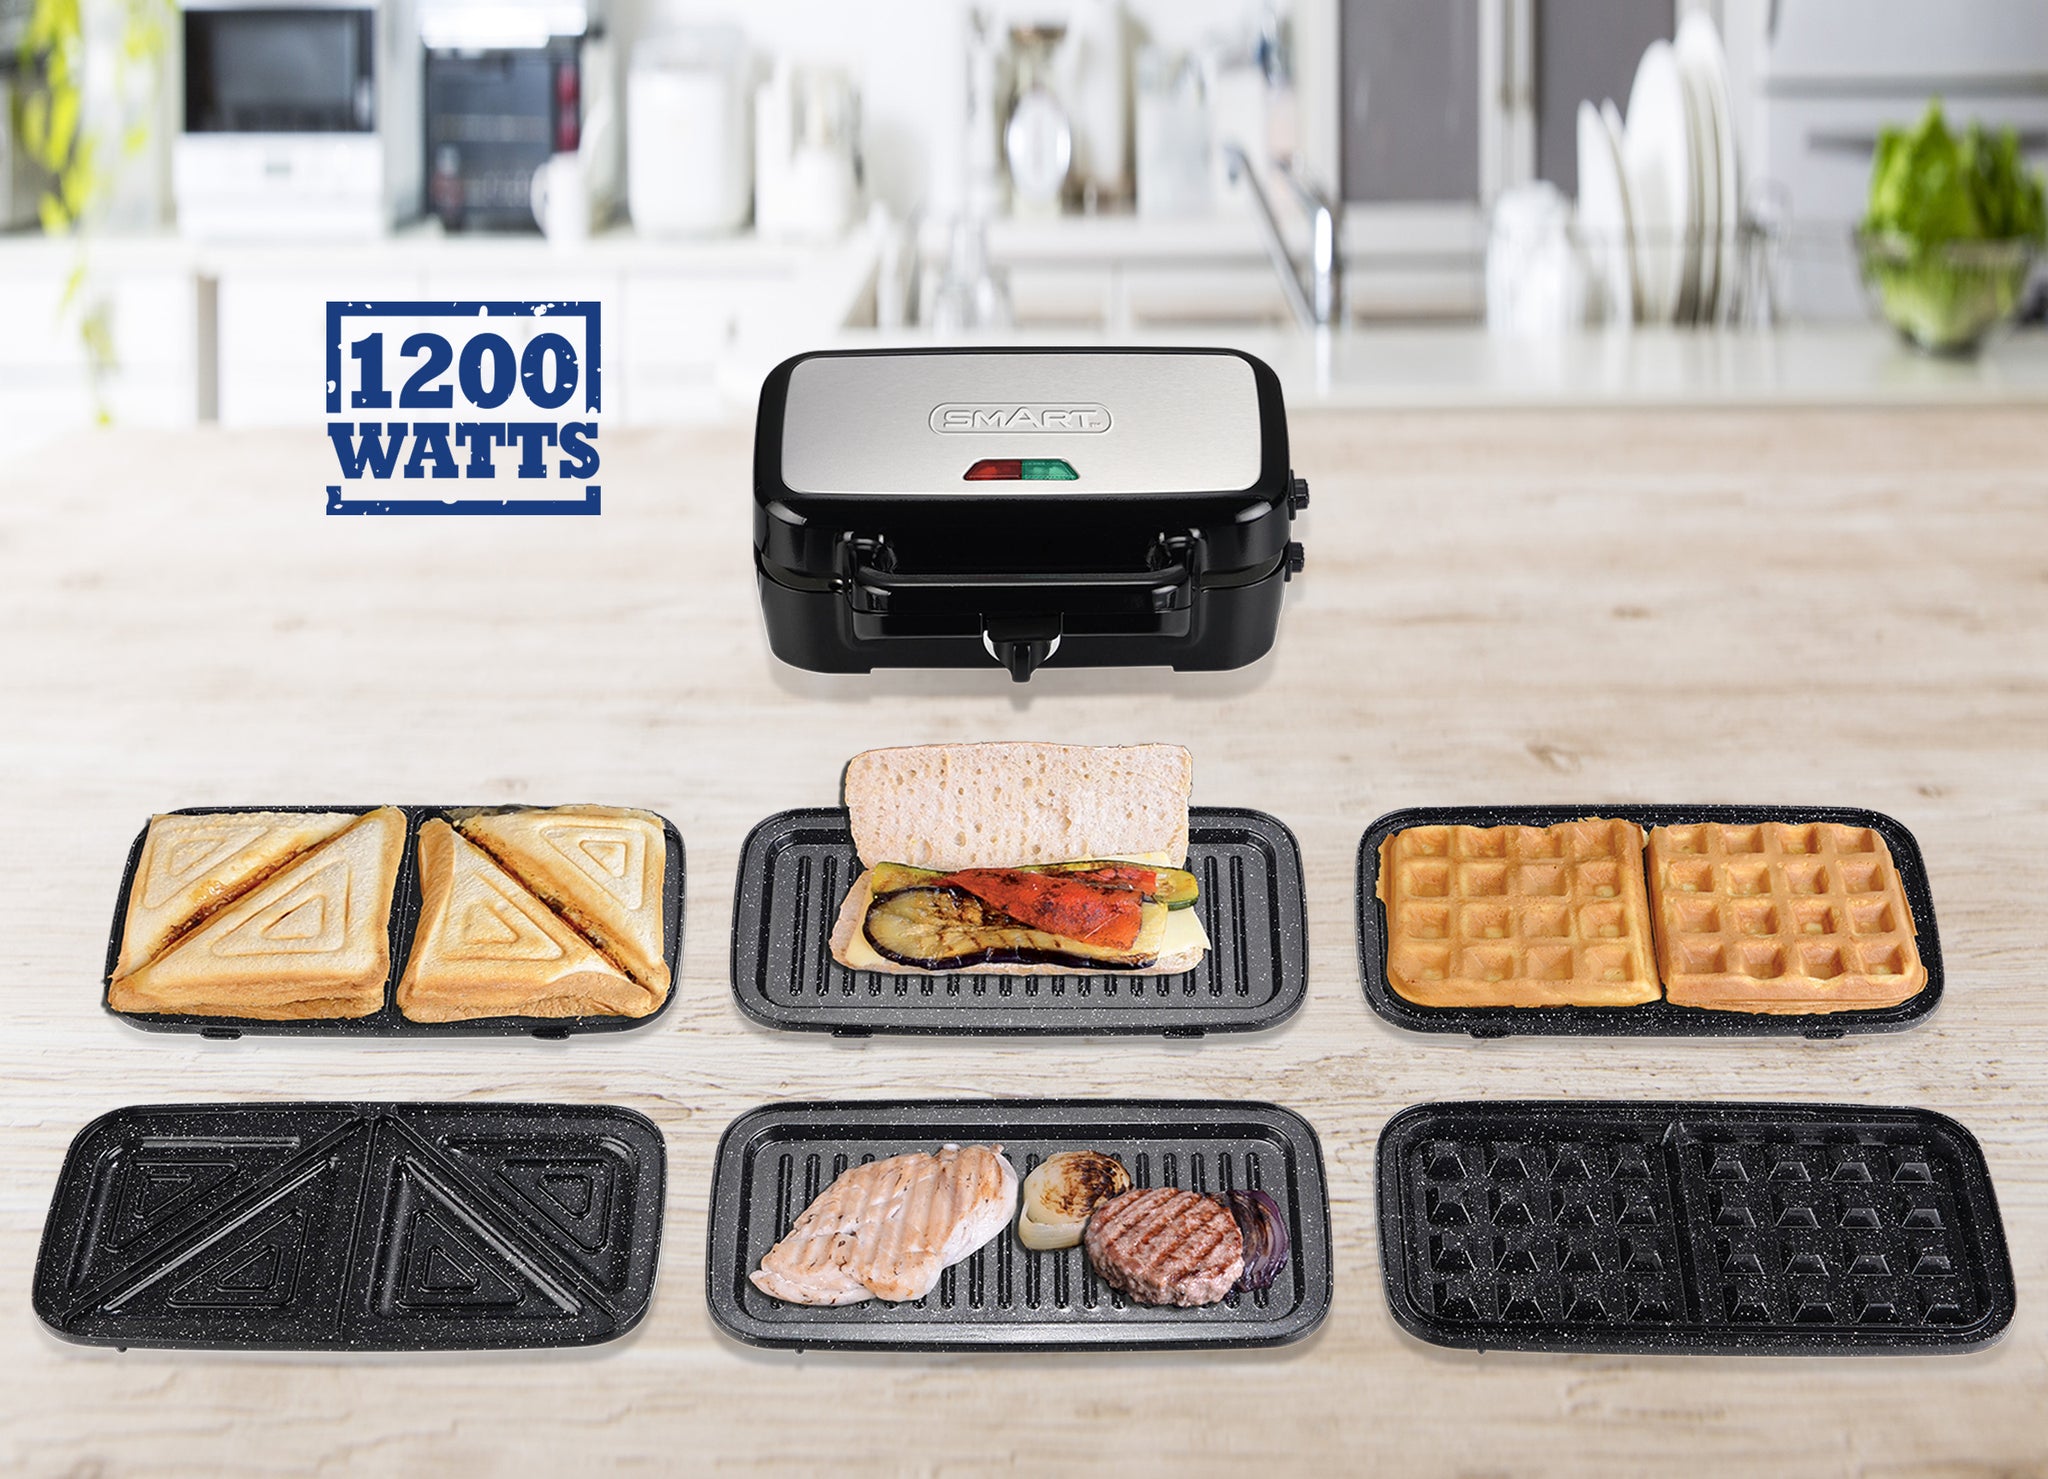 3 in 1 Sandwich Maker, Waffle Maker with Removable Plates, 1200W Panini  Press wi